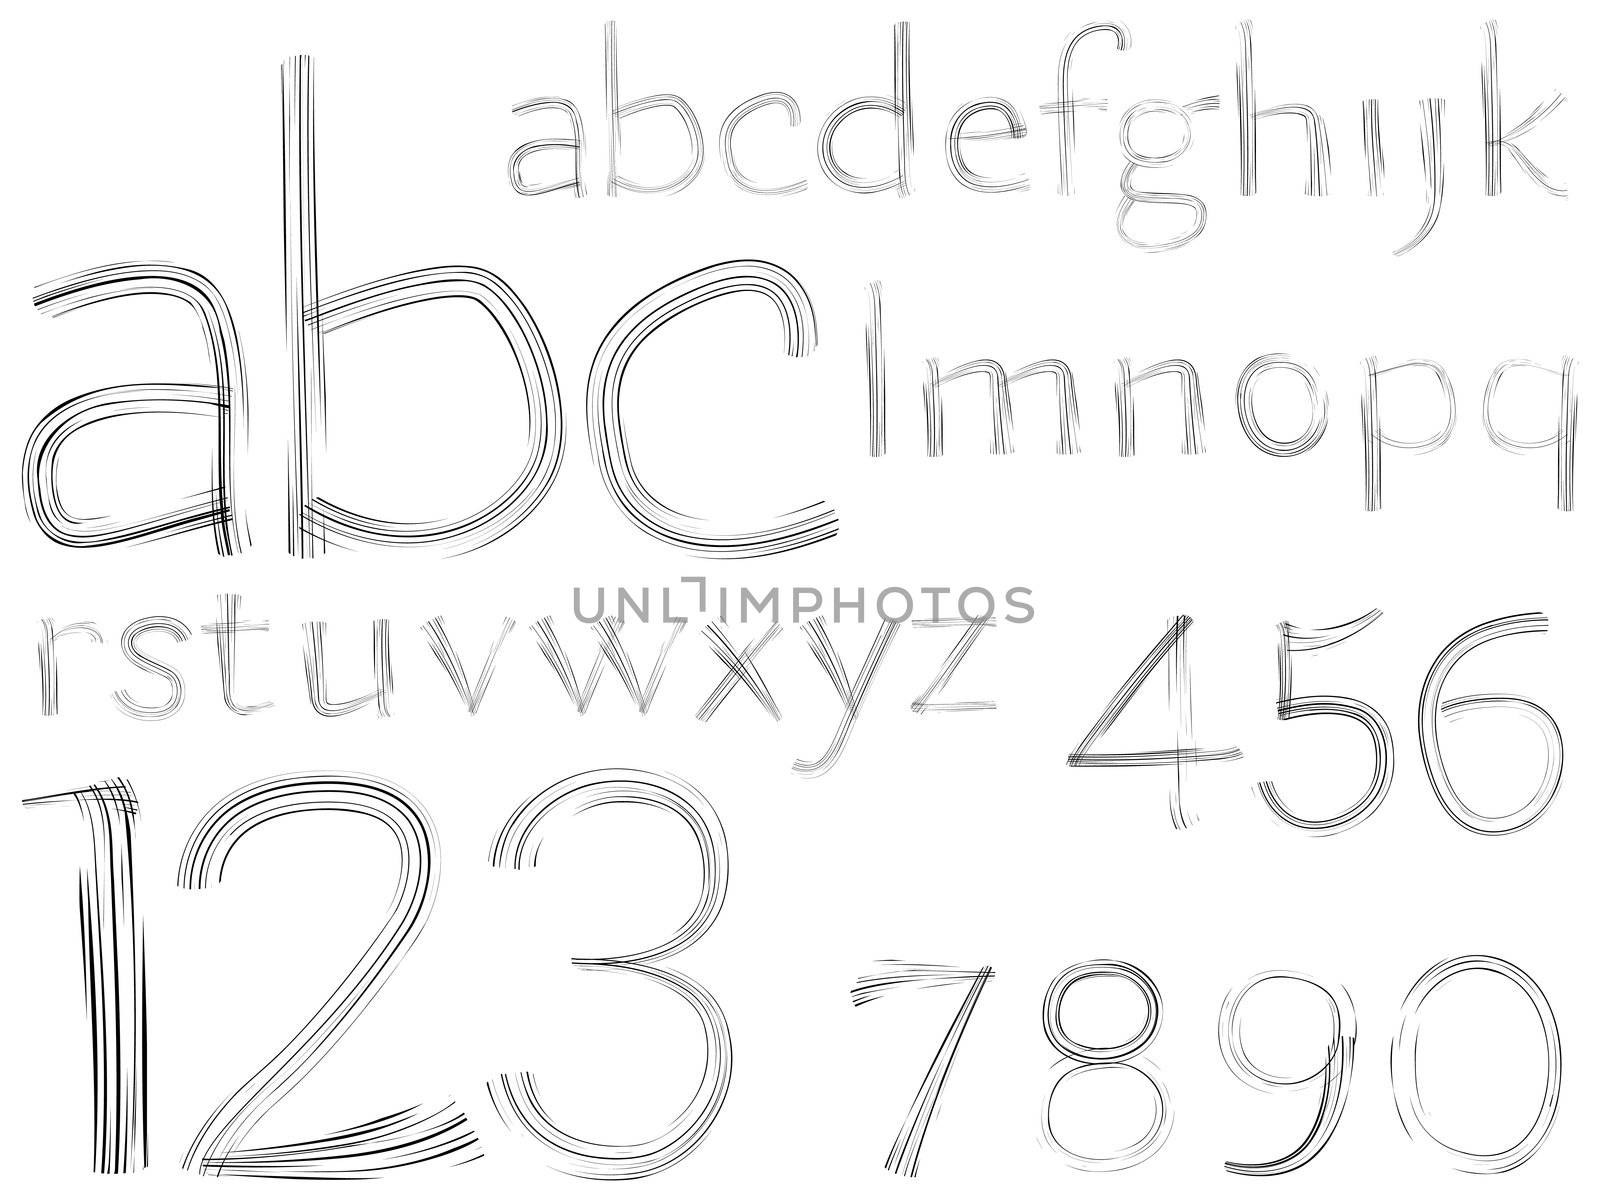 sketch hand drawn alphabet and numbers by robertosch